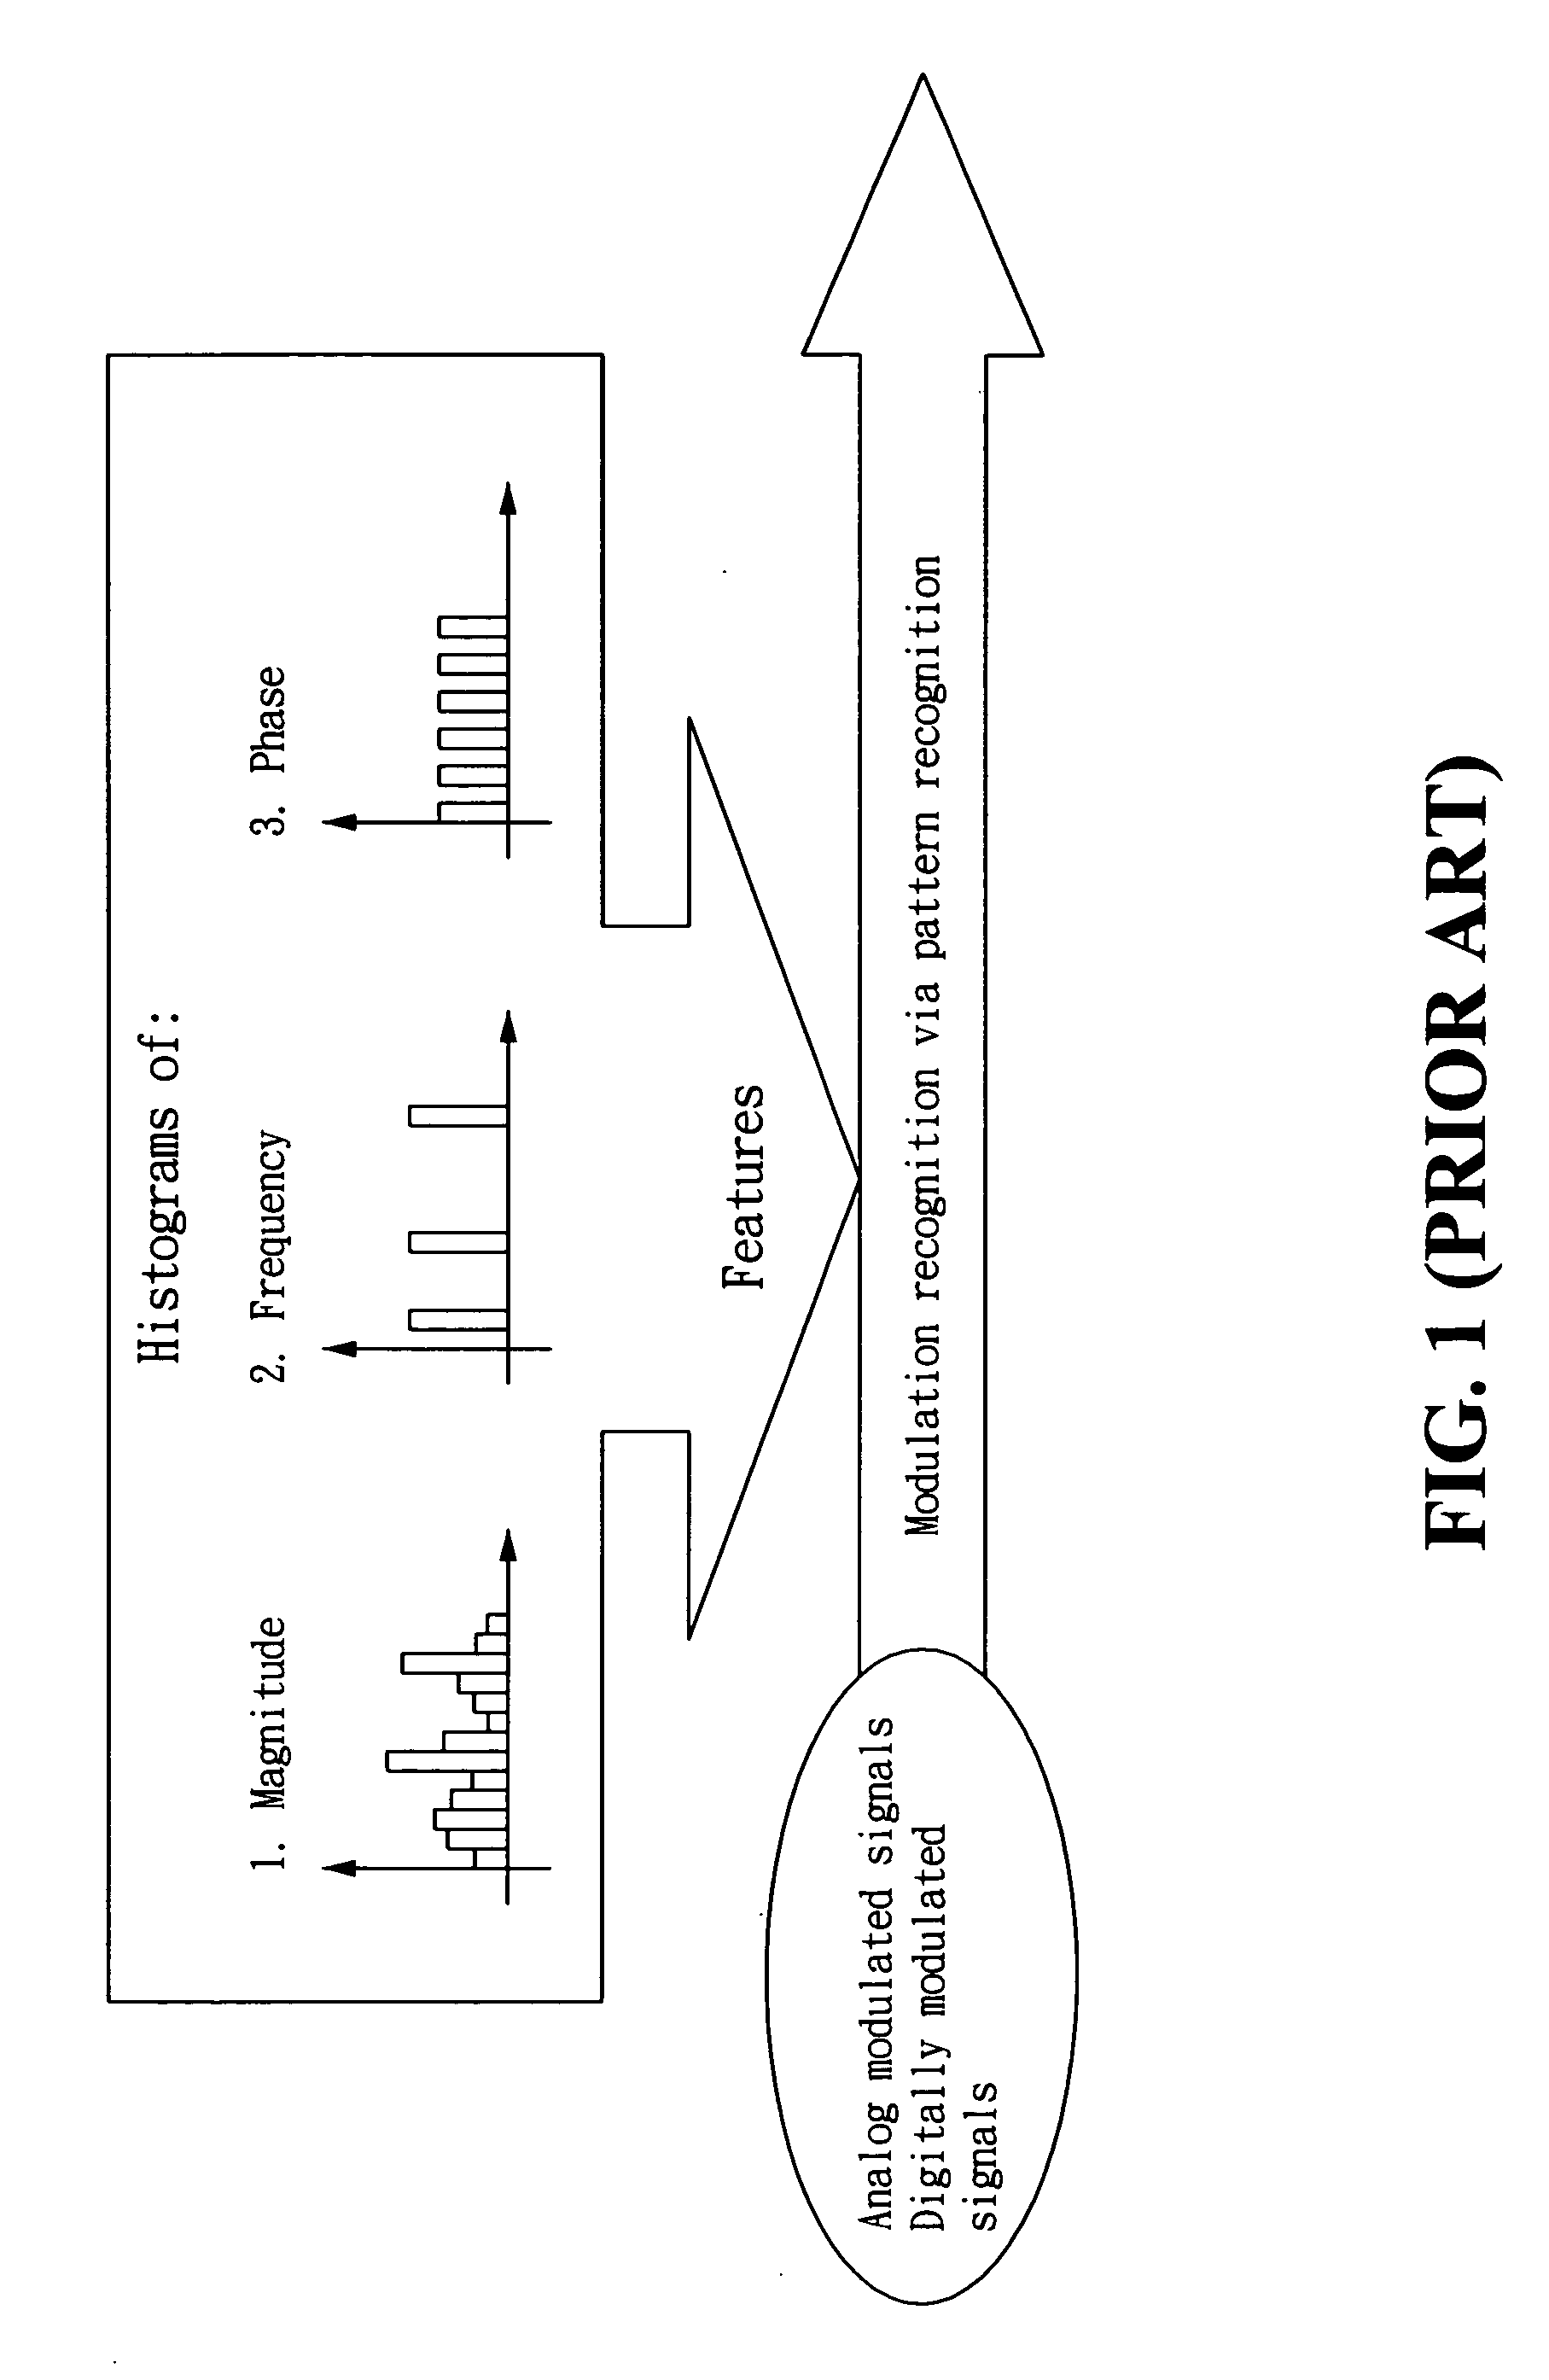 Method and device for modulation recognition of digitally modulated signals with multi-level magnitudes